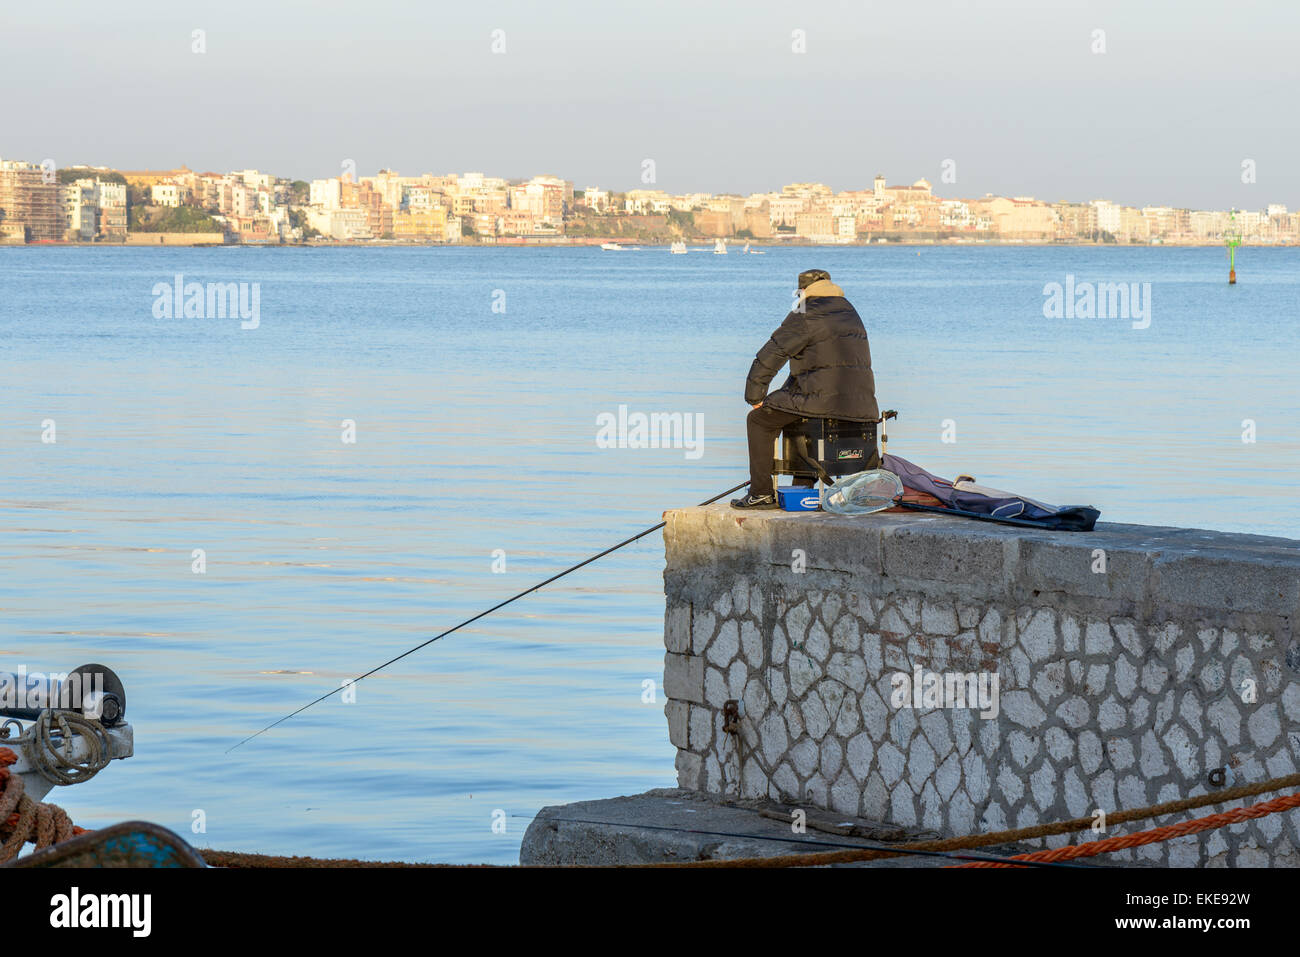 Man fishing in a winter day to seaport near rome italy Stock Photo